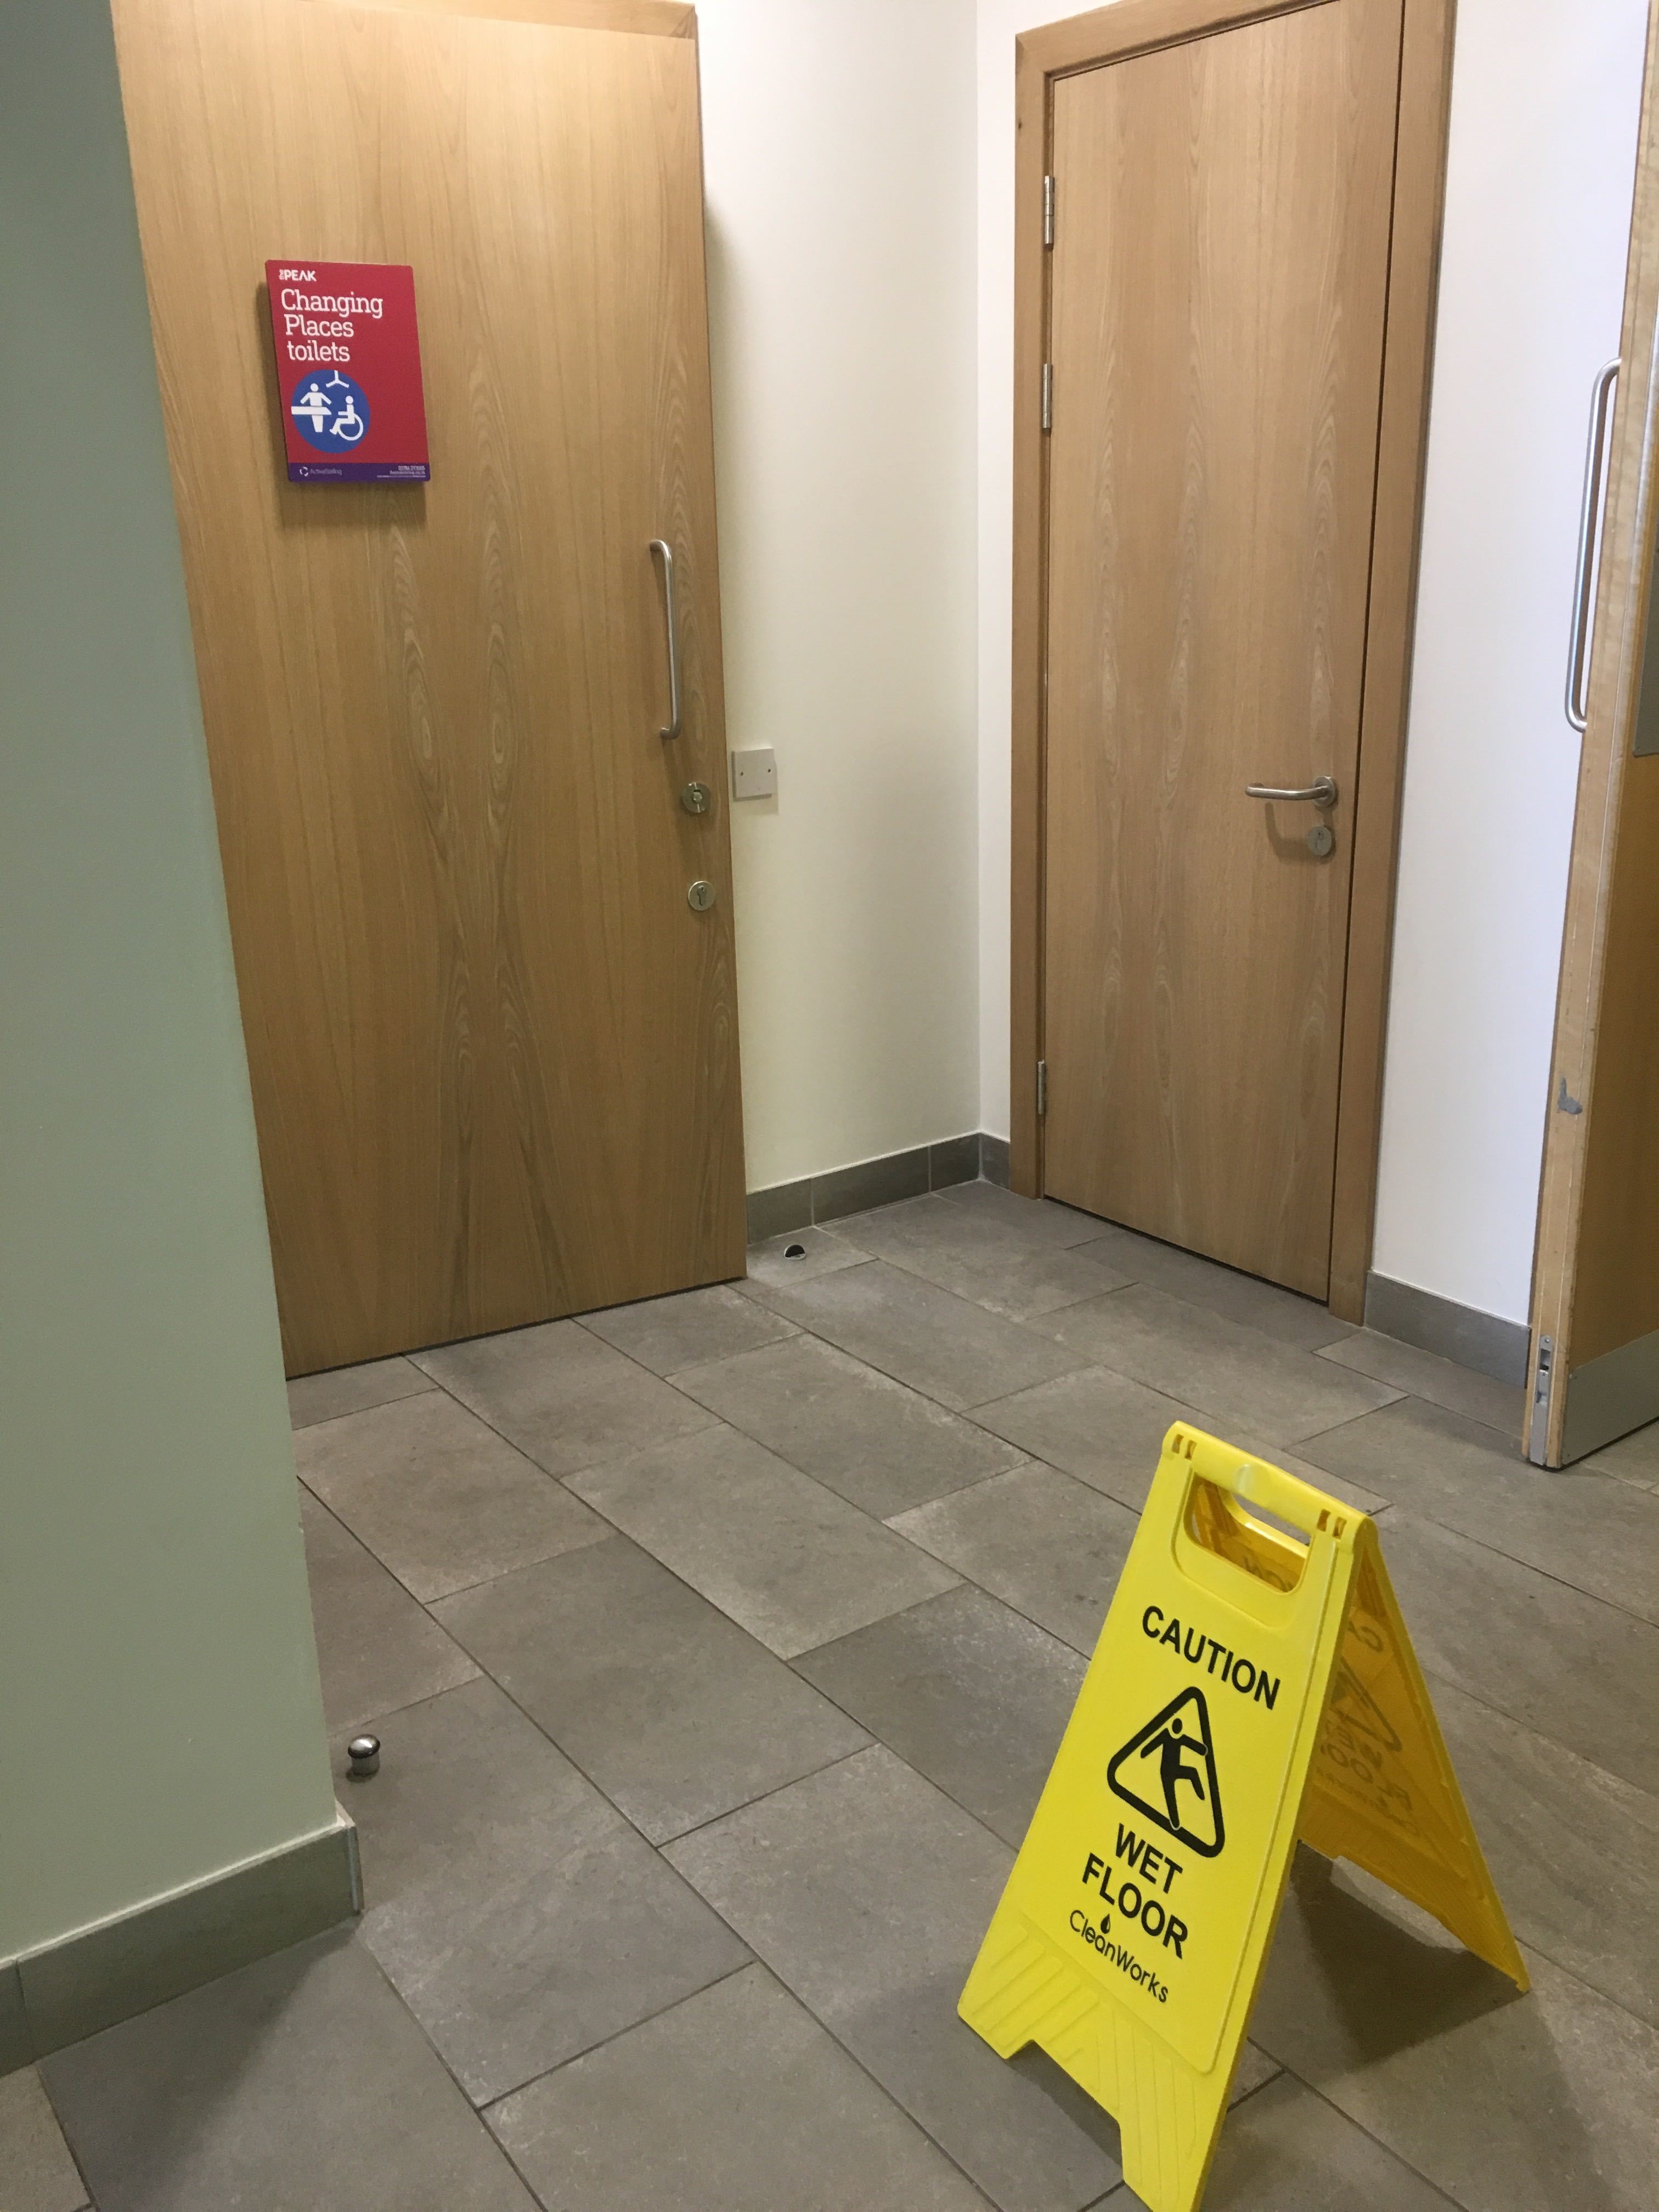 Photo of a sign saying 'Caution Wet Floor' outside a Changing Place Toilet